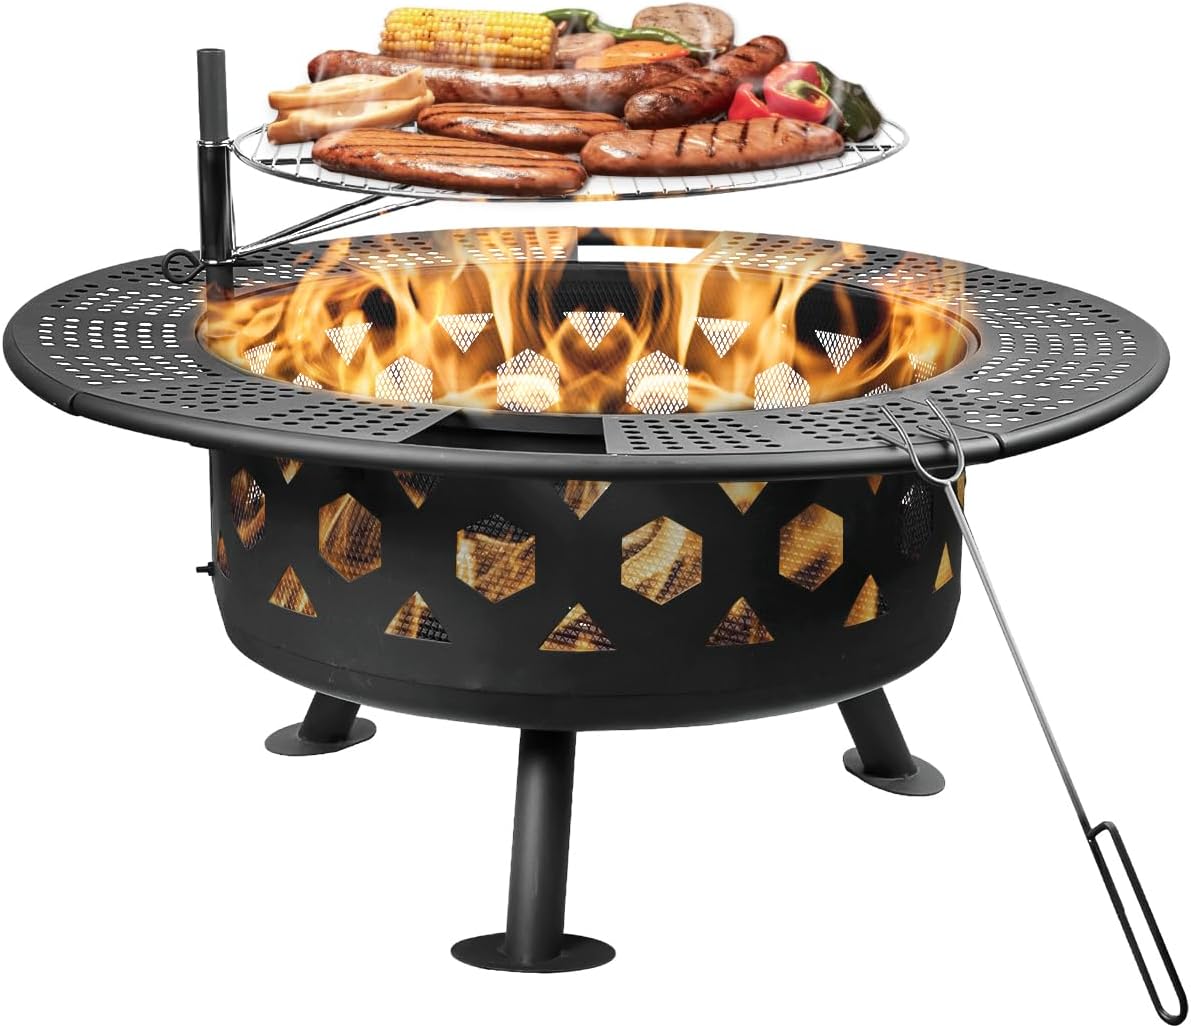 32 Inch Outdoor Fire Pit, 2-in-One Large Camping Fire Pits for Outside with Cooking Grill and Fire Poker, Wood Burning Firepit for BBQ,Warm up, Patio, Bonfire, Camping, Picnic.